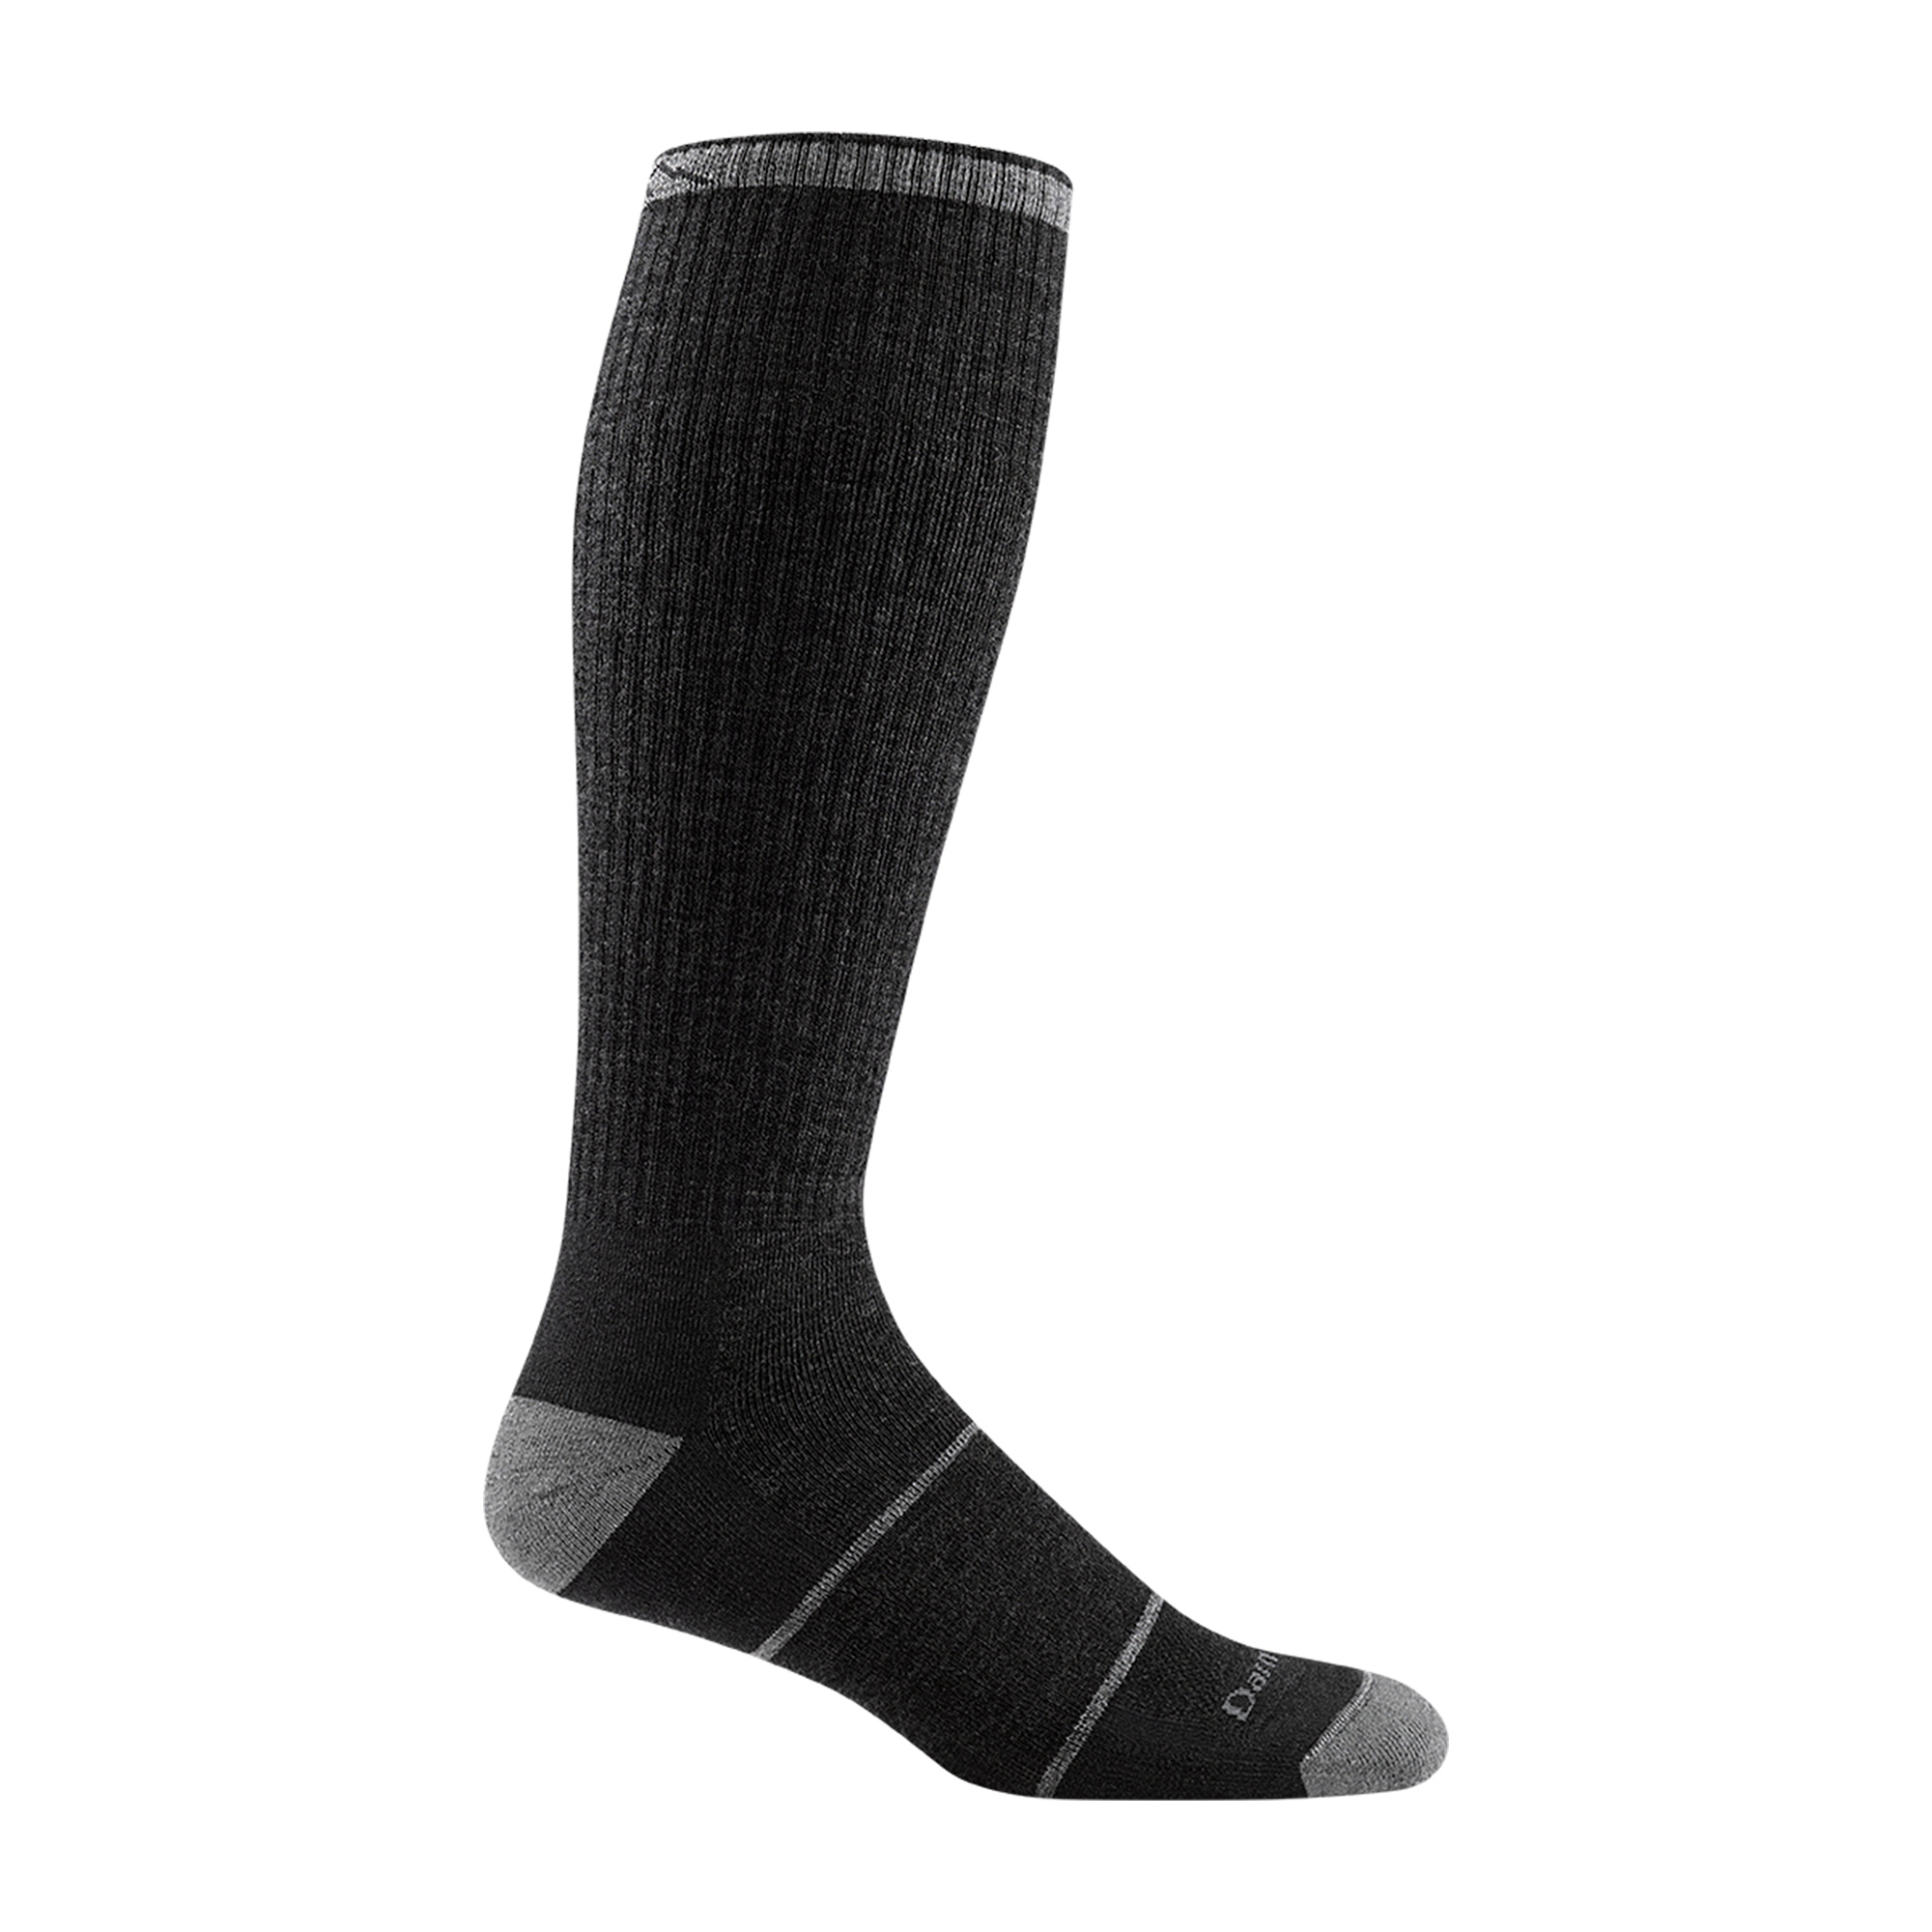 2003 men's paul bunyan over-the-calf work sock in dark gray with light gray toe/heel accents and 2 gray forefoot stripes